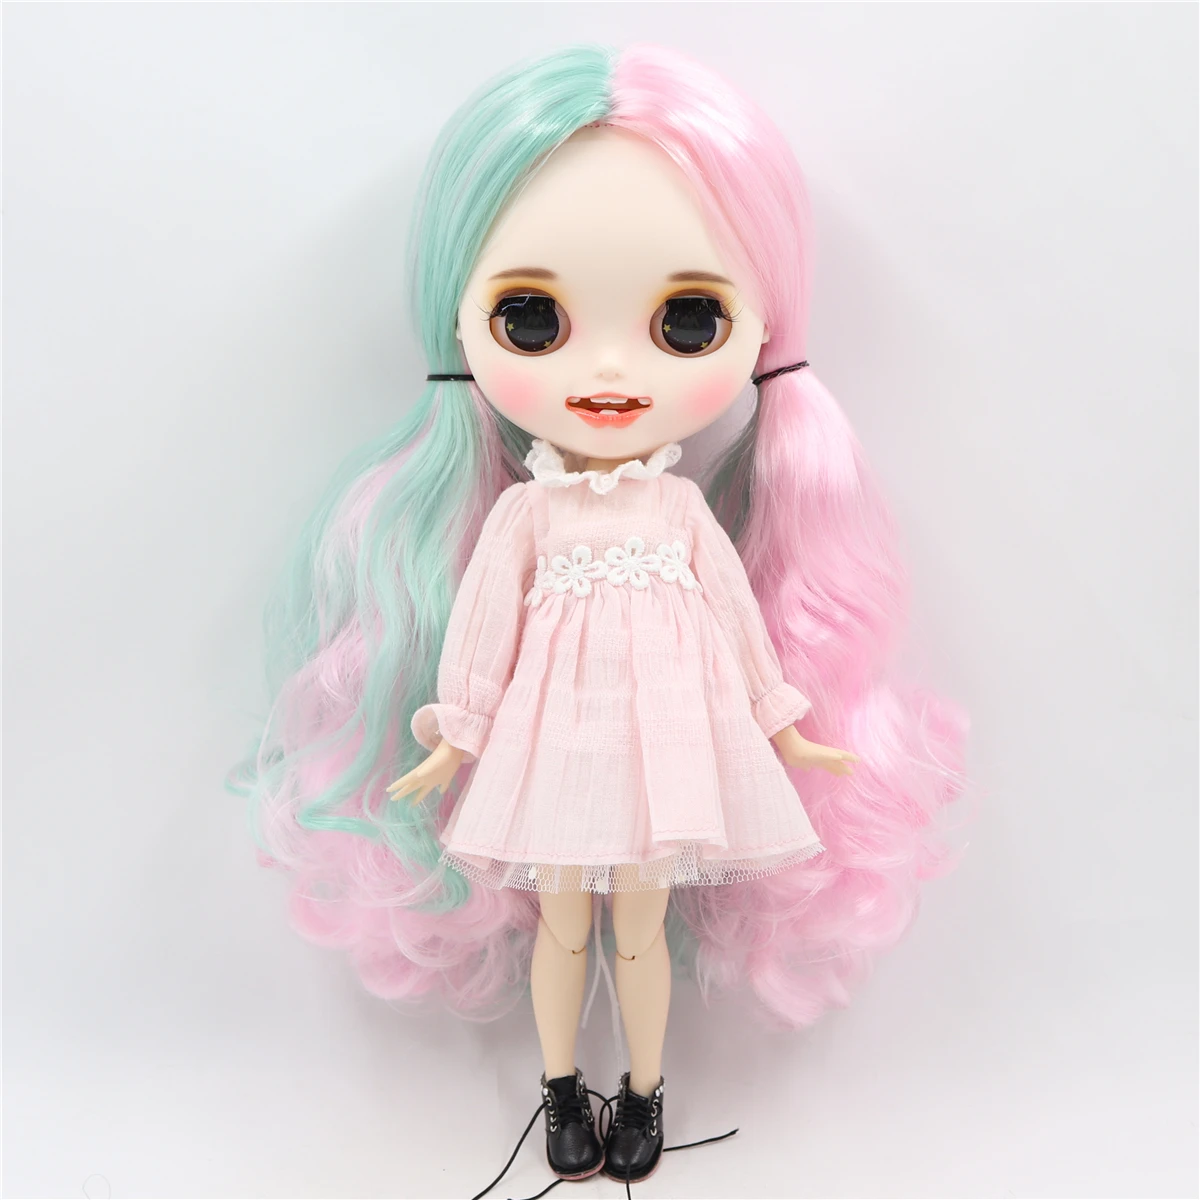 Details about   12" Blythe Doll Matte Customized Face Colorful hair Carved lips Eye Change Toy 